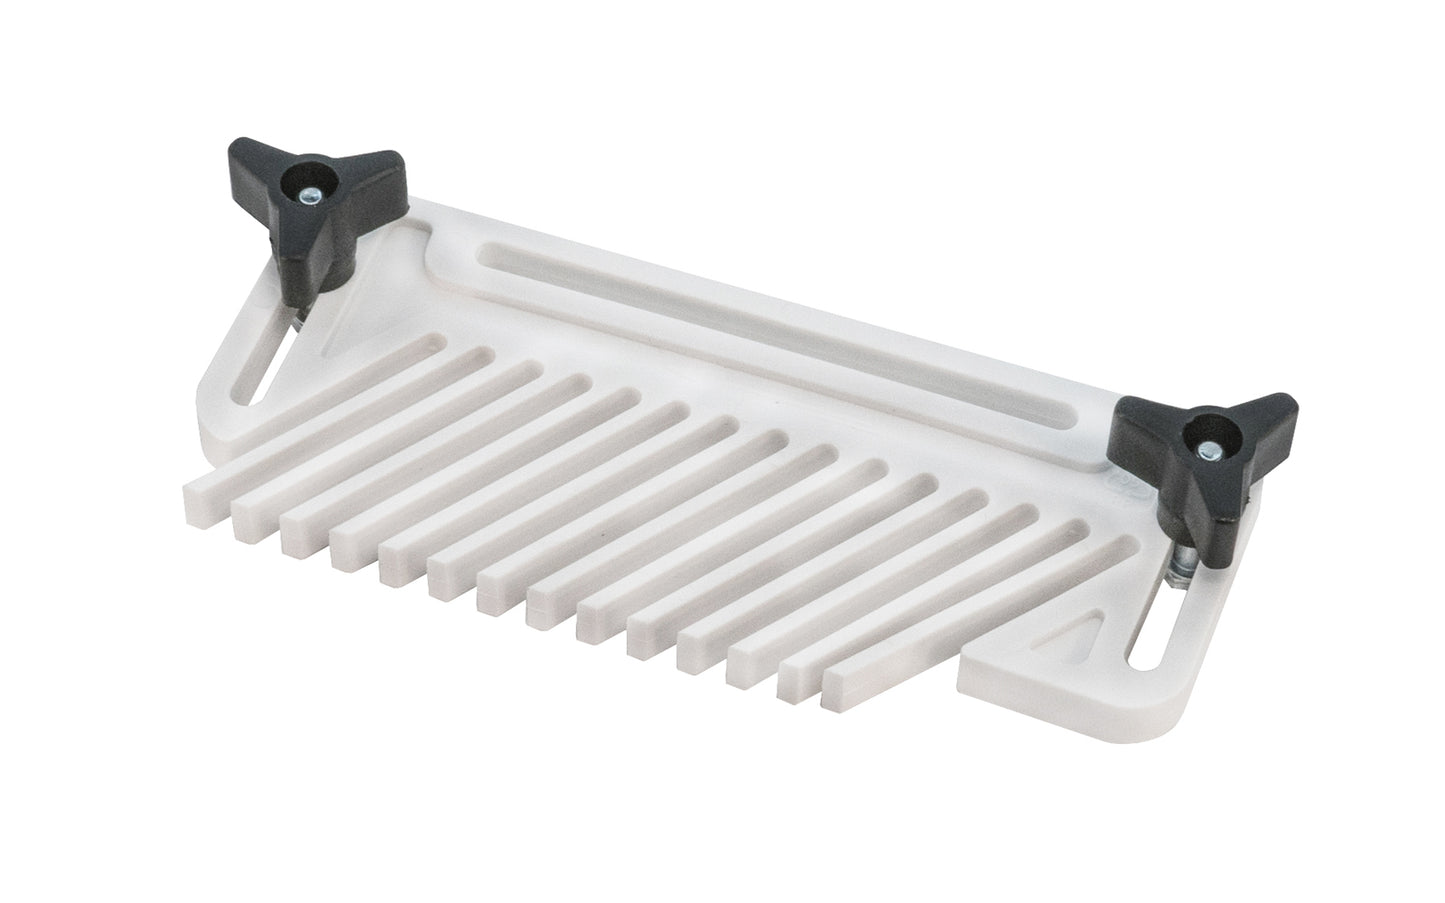 Use the Hold Down Fence Featherboard on table saws, band saws or router tables. By attaching the featherboard to a fence, adequate downward pressure is provided to keep the workpiece secure. Adjustments are made with bolts & two slots for screws. Size is 7-3/4" x 3-1/4" x 1/2". Model 825-6050. 744391126986